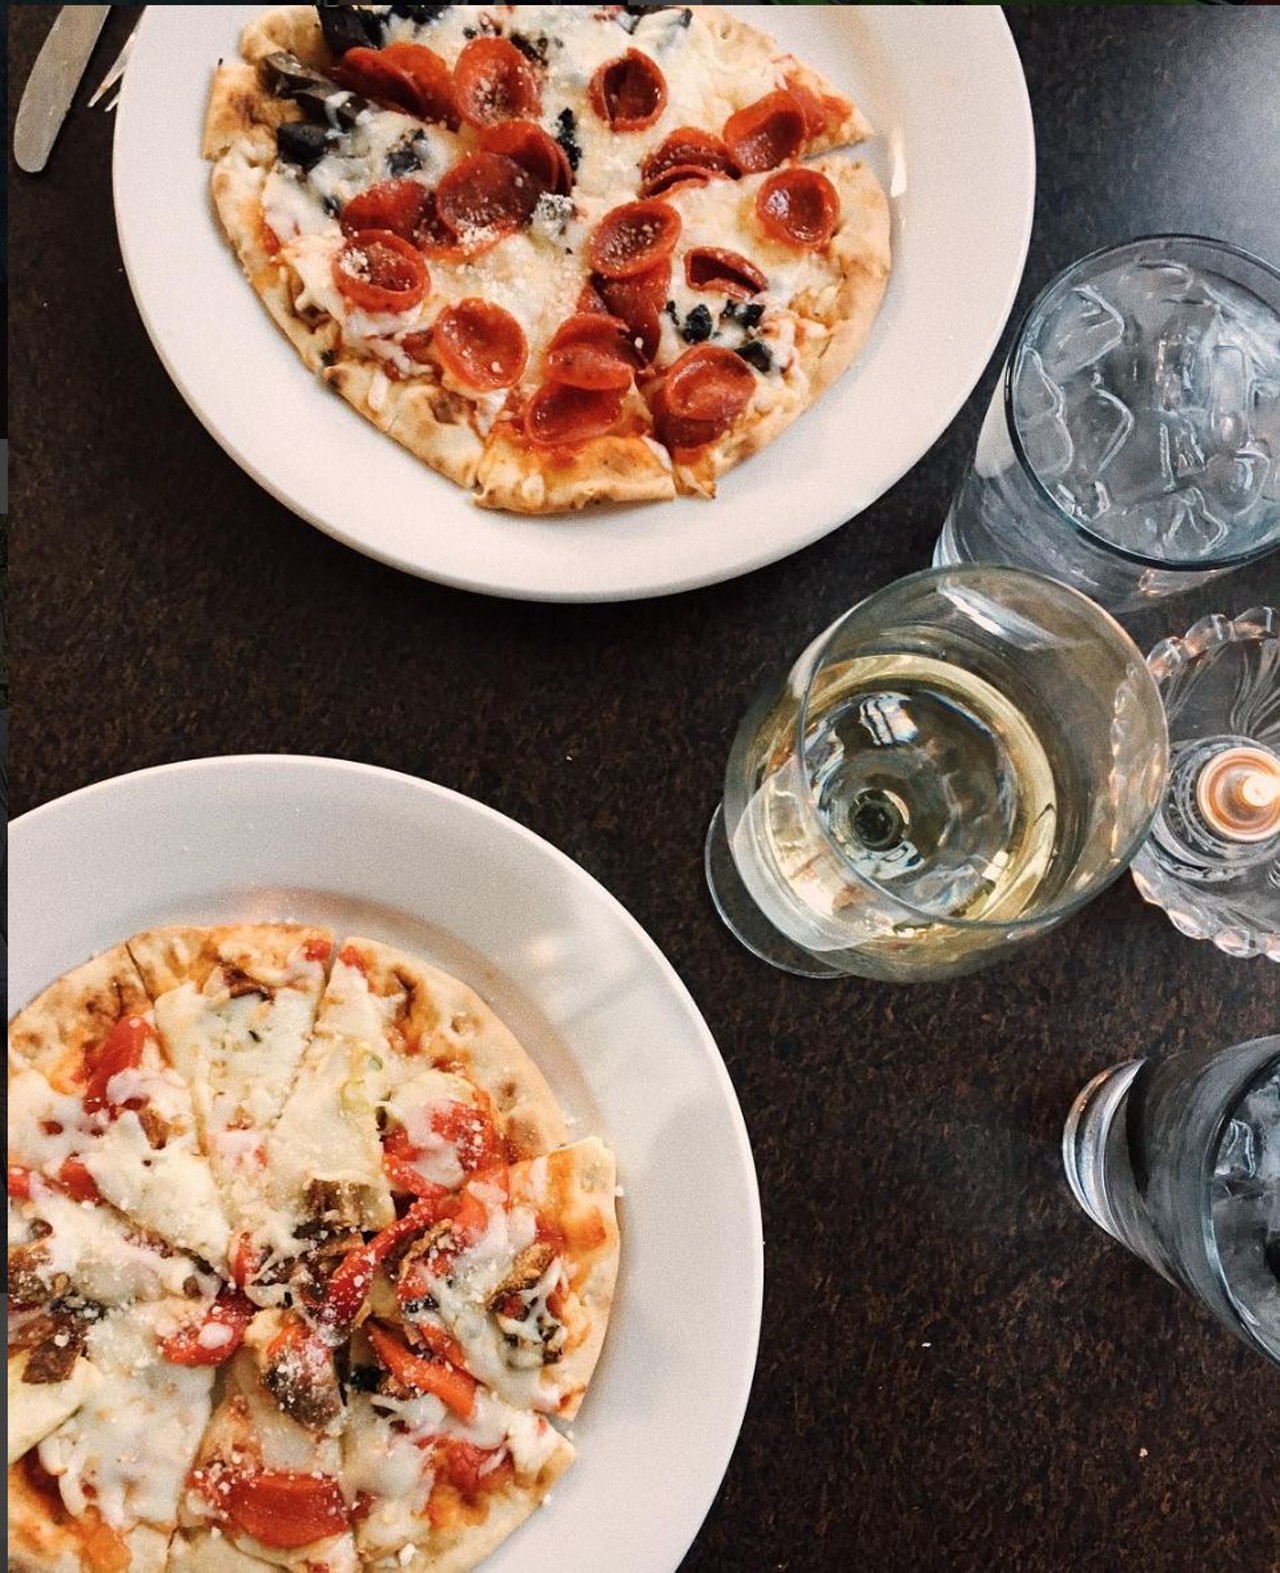 La Dolce Vita
216-721-8155, 12112 Mayfield Rd;
Several of their pizzas can be made meatless, too, which is always a tasty and worthwhile indulgence. 
Photo via kalynnelizabeth_/Instagram